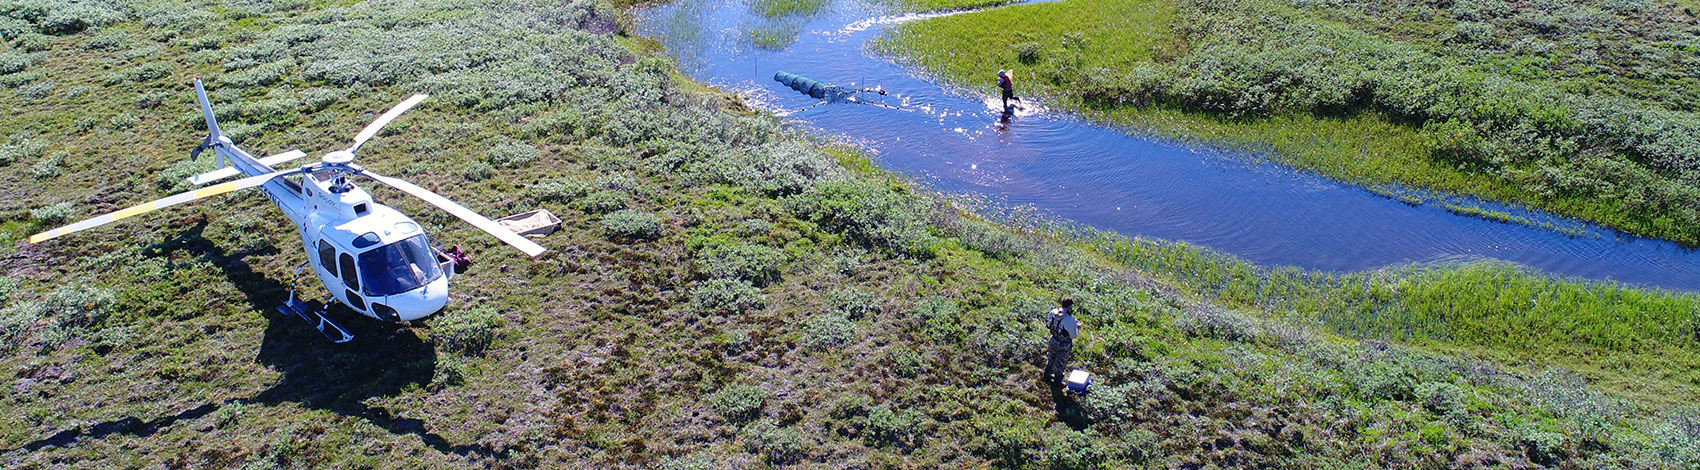 Aerial view of researchers at work by creek with landed helicopter.